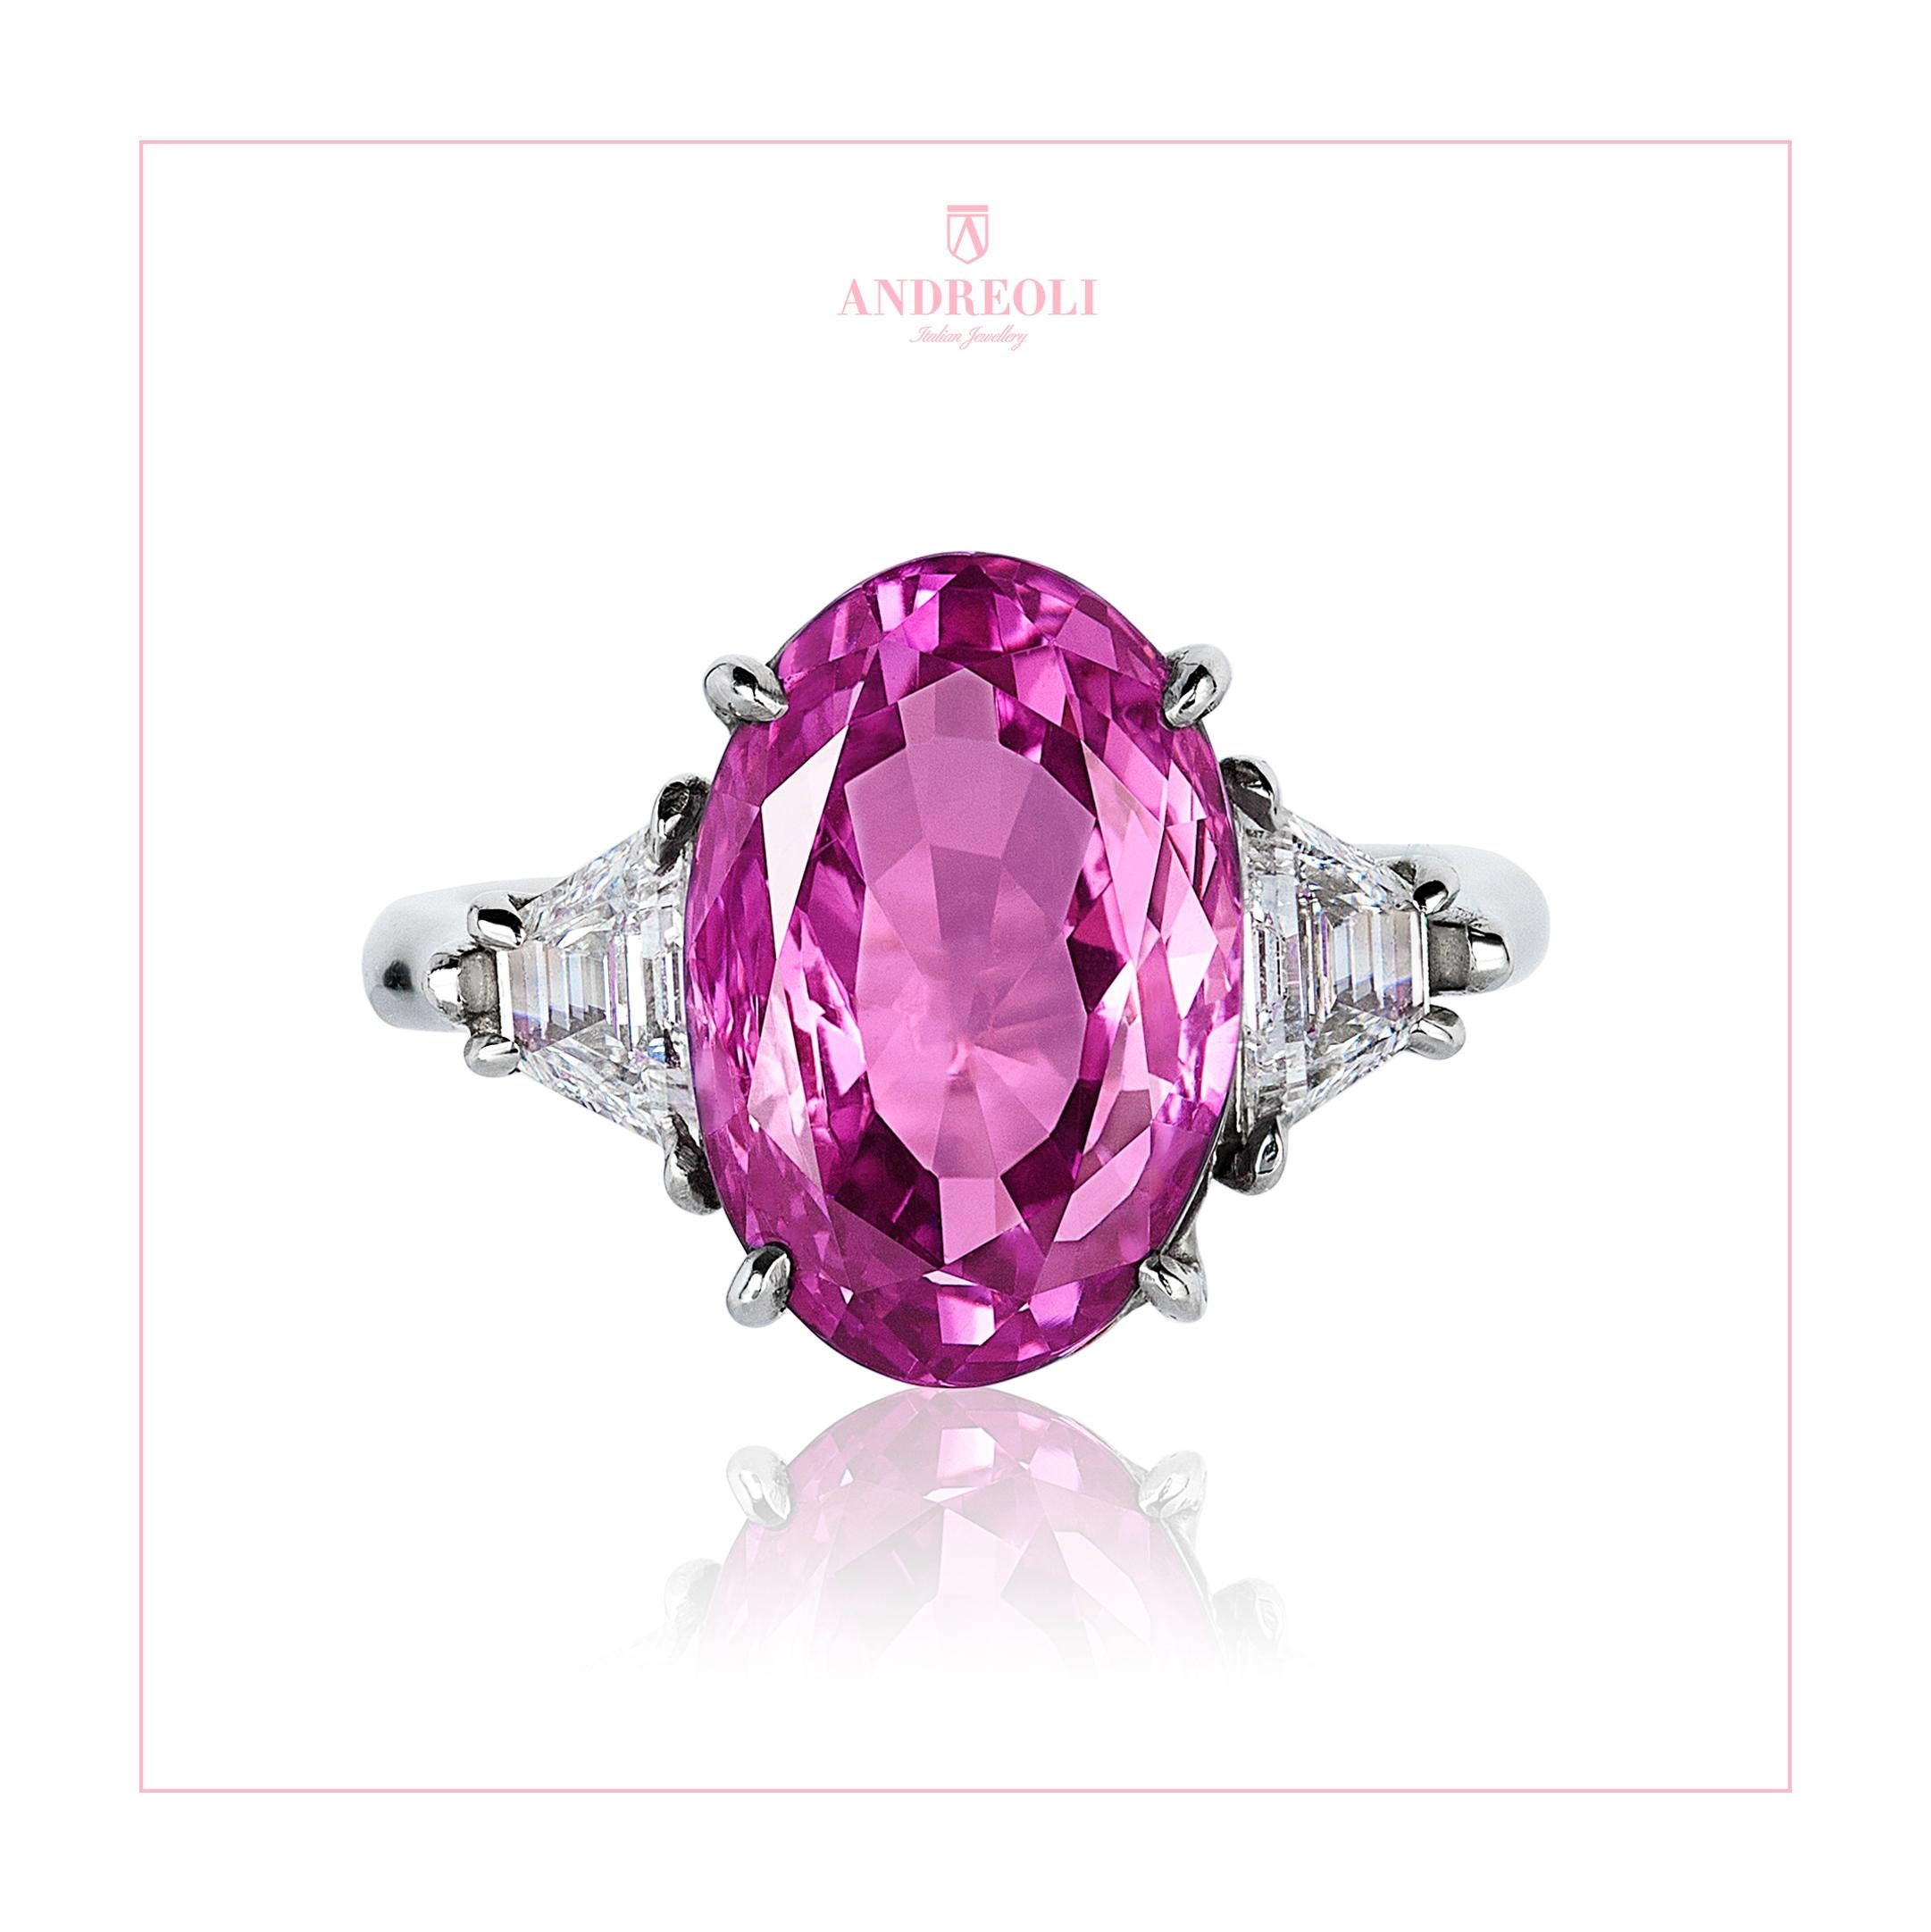 Andreoli GIA Certified 9.39 Carat Pink Sapphire Diamond Platinum Ring In New Condition For Sale In New York, NY